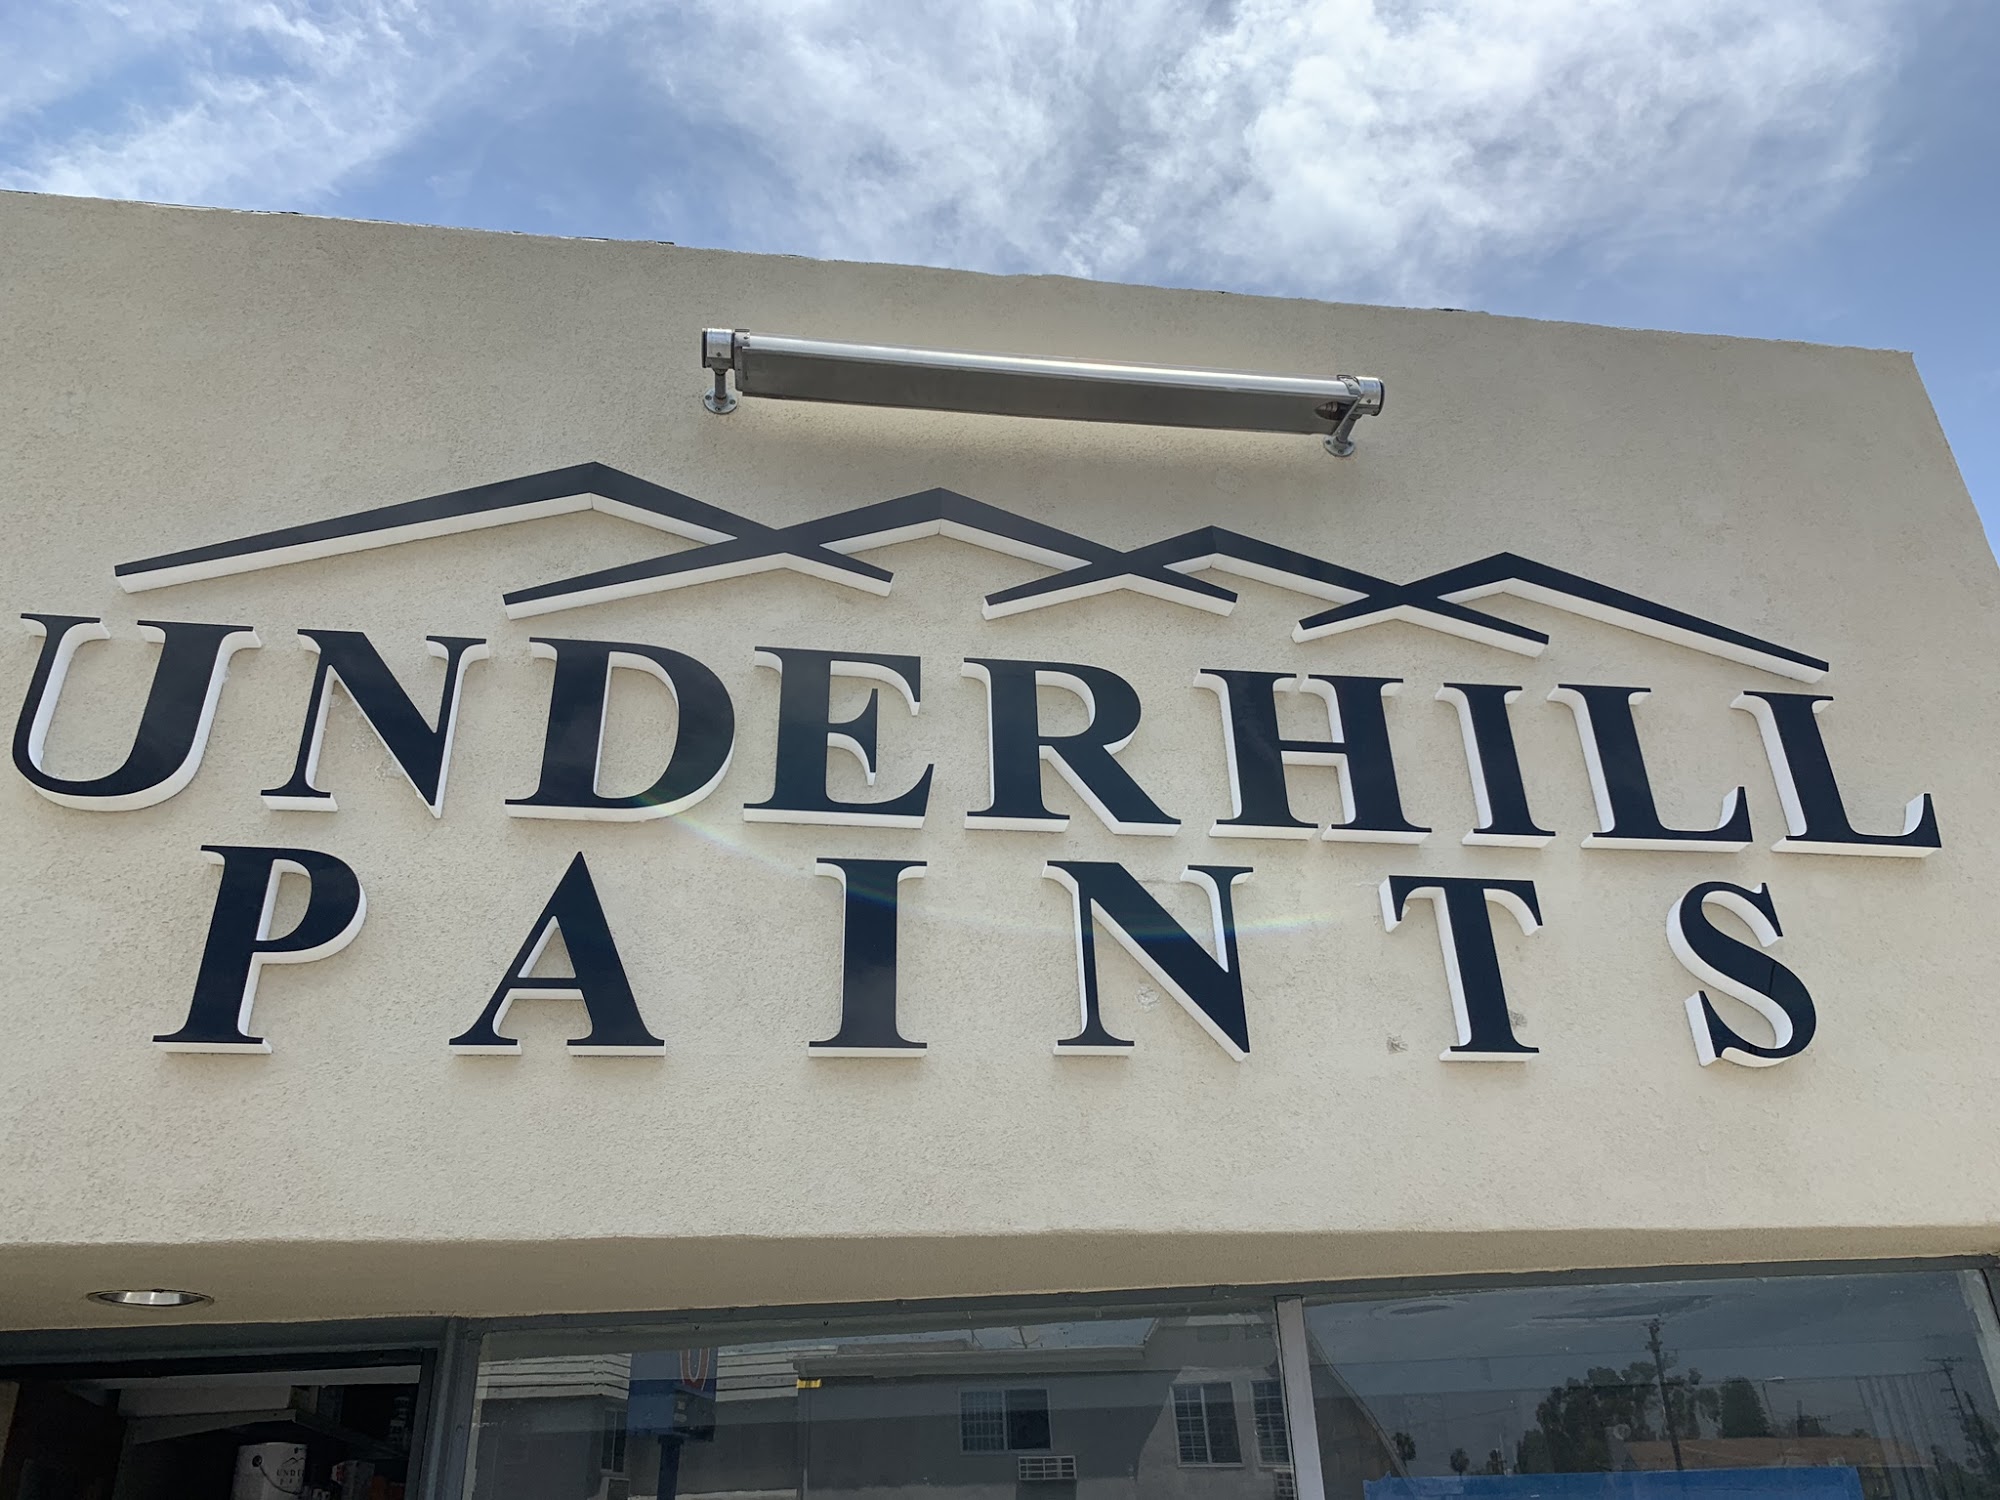 Underhill Painters available and Paint store 40 years